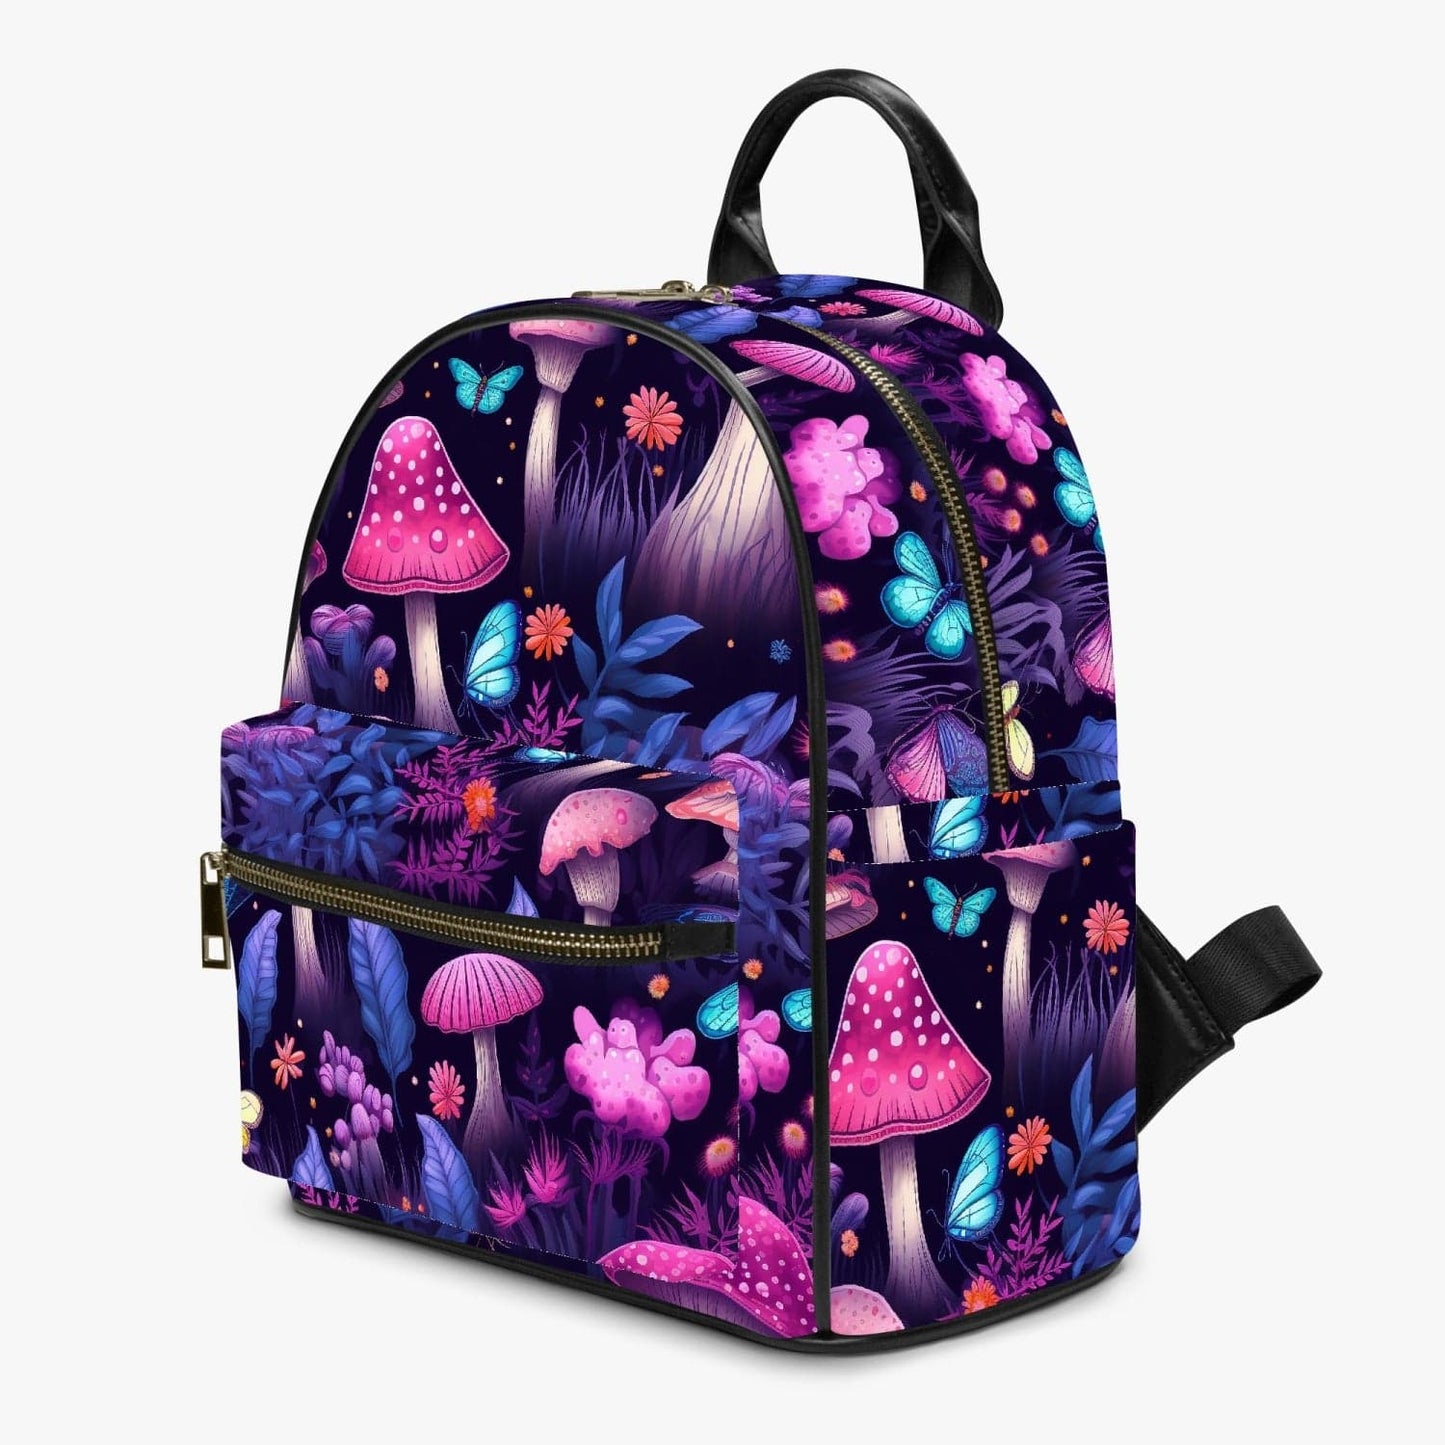 side view of backpack featuring a midnight garden of mushroomcore bright glowing pink and purple mushrooms printed on strong waterproof pu